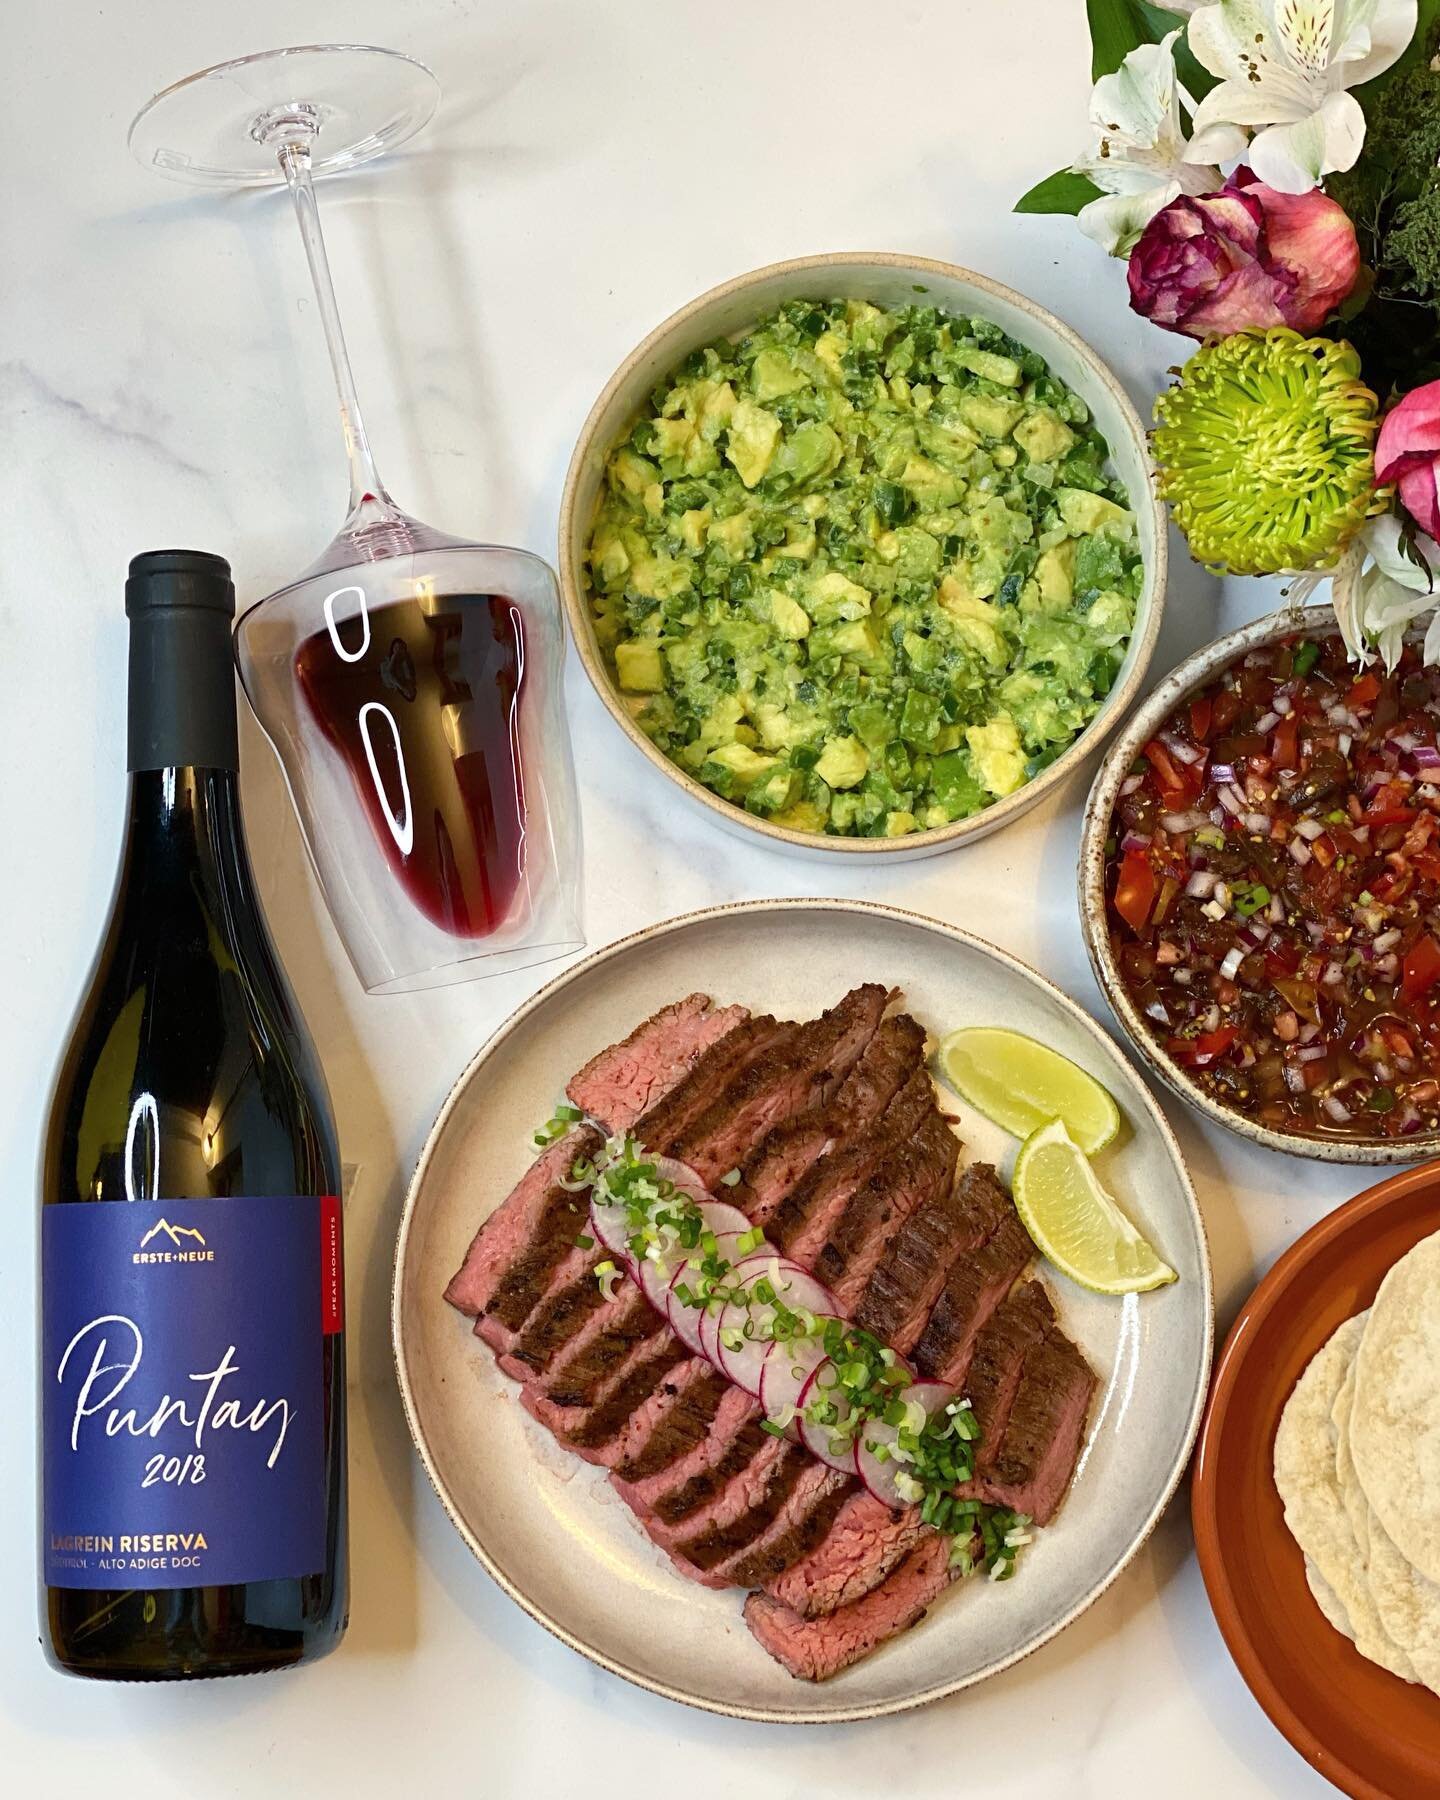 Cinco de Mayo Celebration with Steak Tacos and Erste + Neue Puntay Lagrein Riserva 🇲🇽🌮🍷
&nbsp;
&nbsp;
Yesterday was Cinco de Mayo. We made Steak Tacos with Guacamole and Salsa last night to in appreciation of Mexican culture and heritage. 
&nbsp;